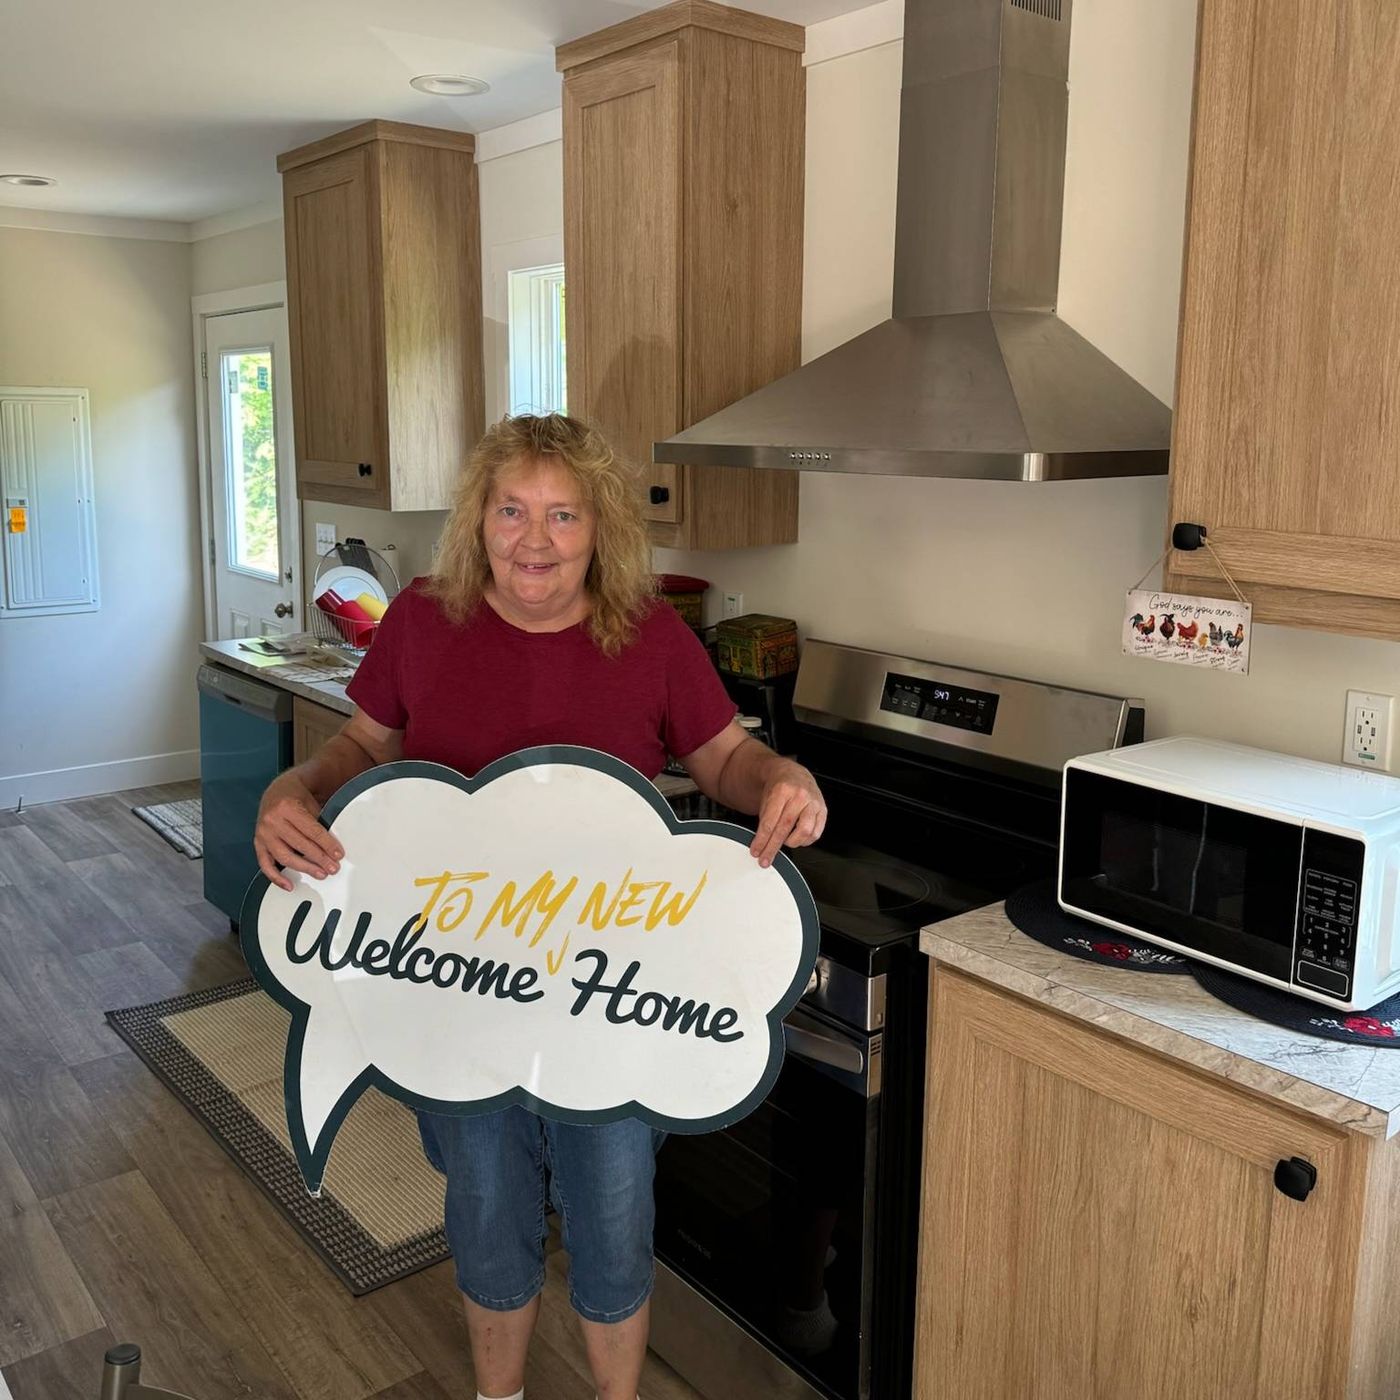 DEBBIE H. welcome home image